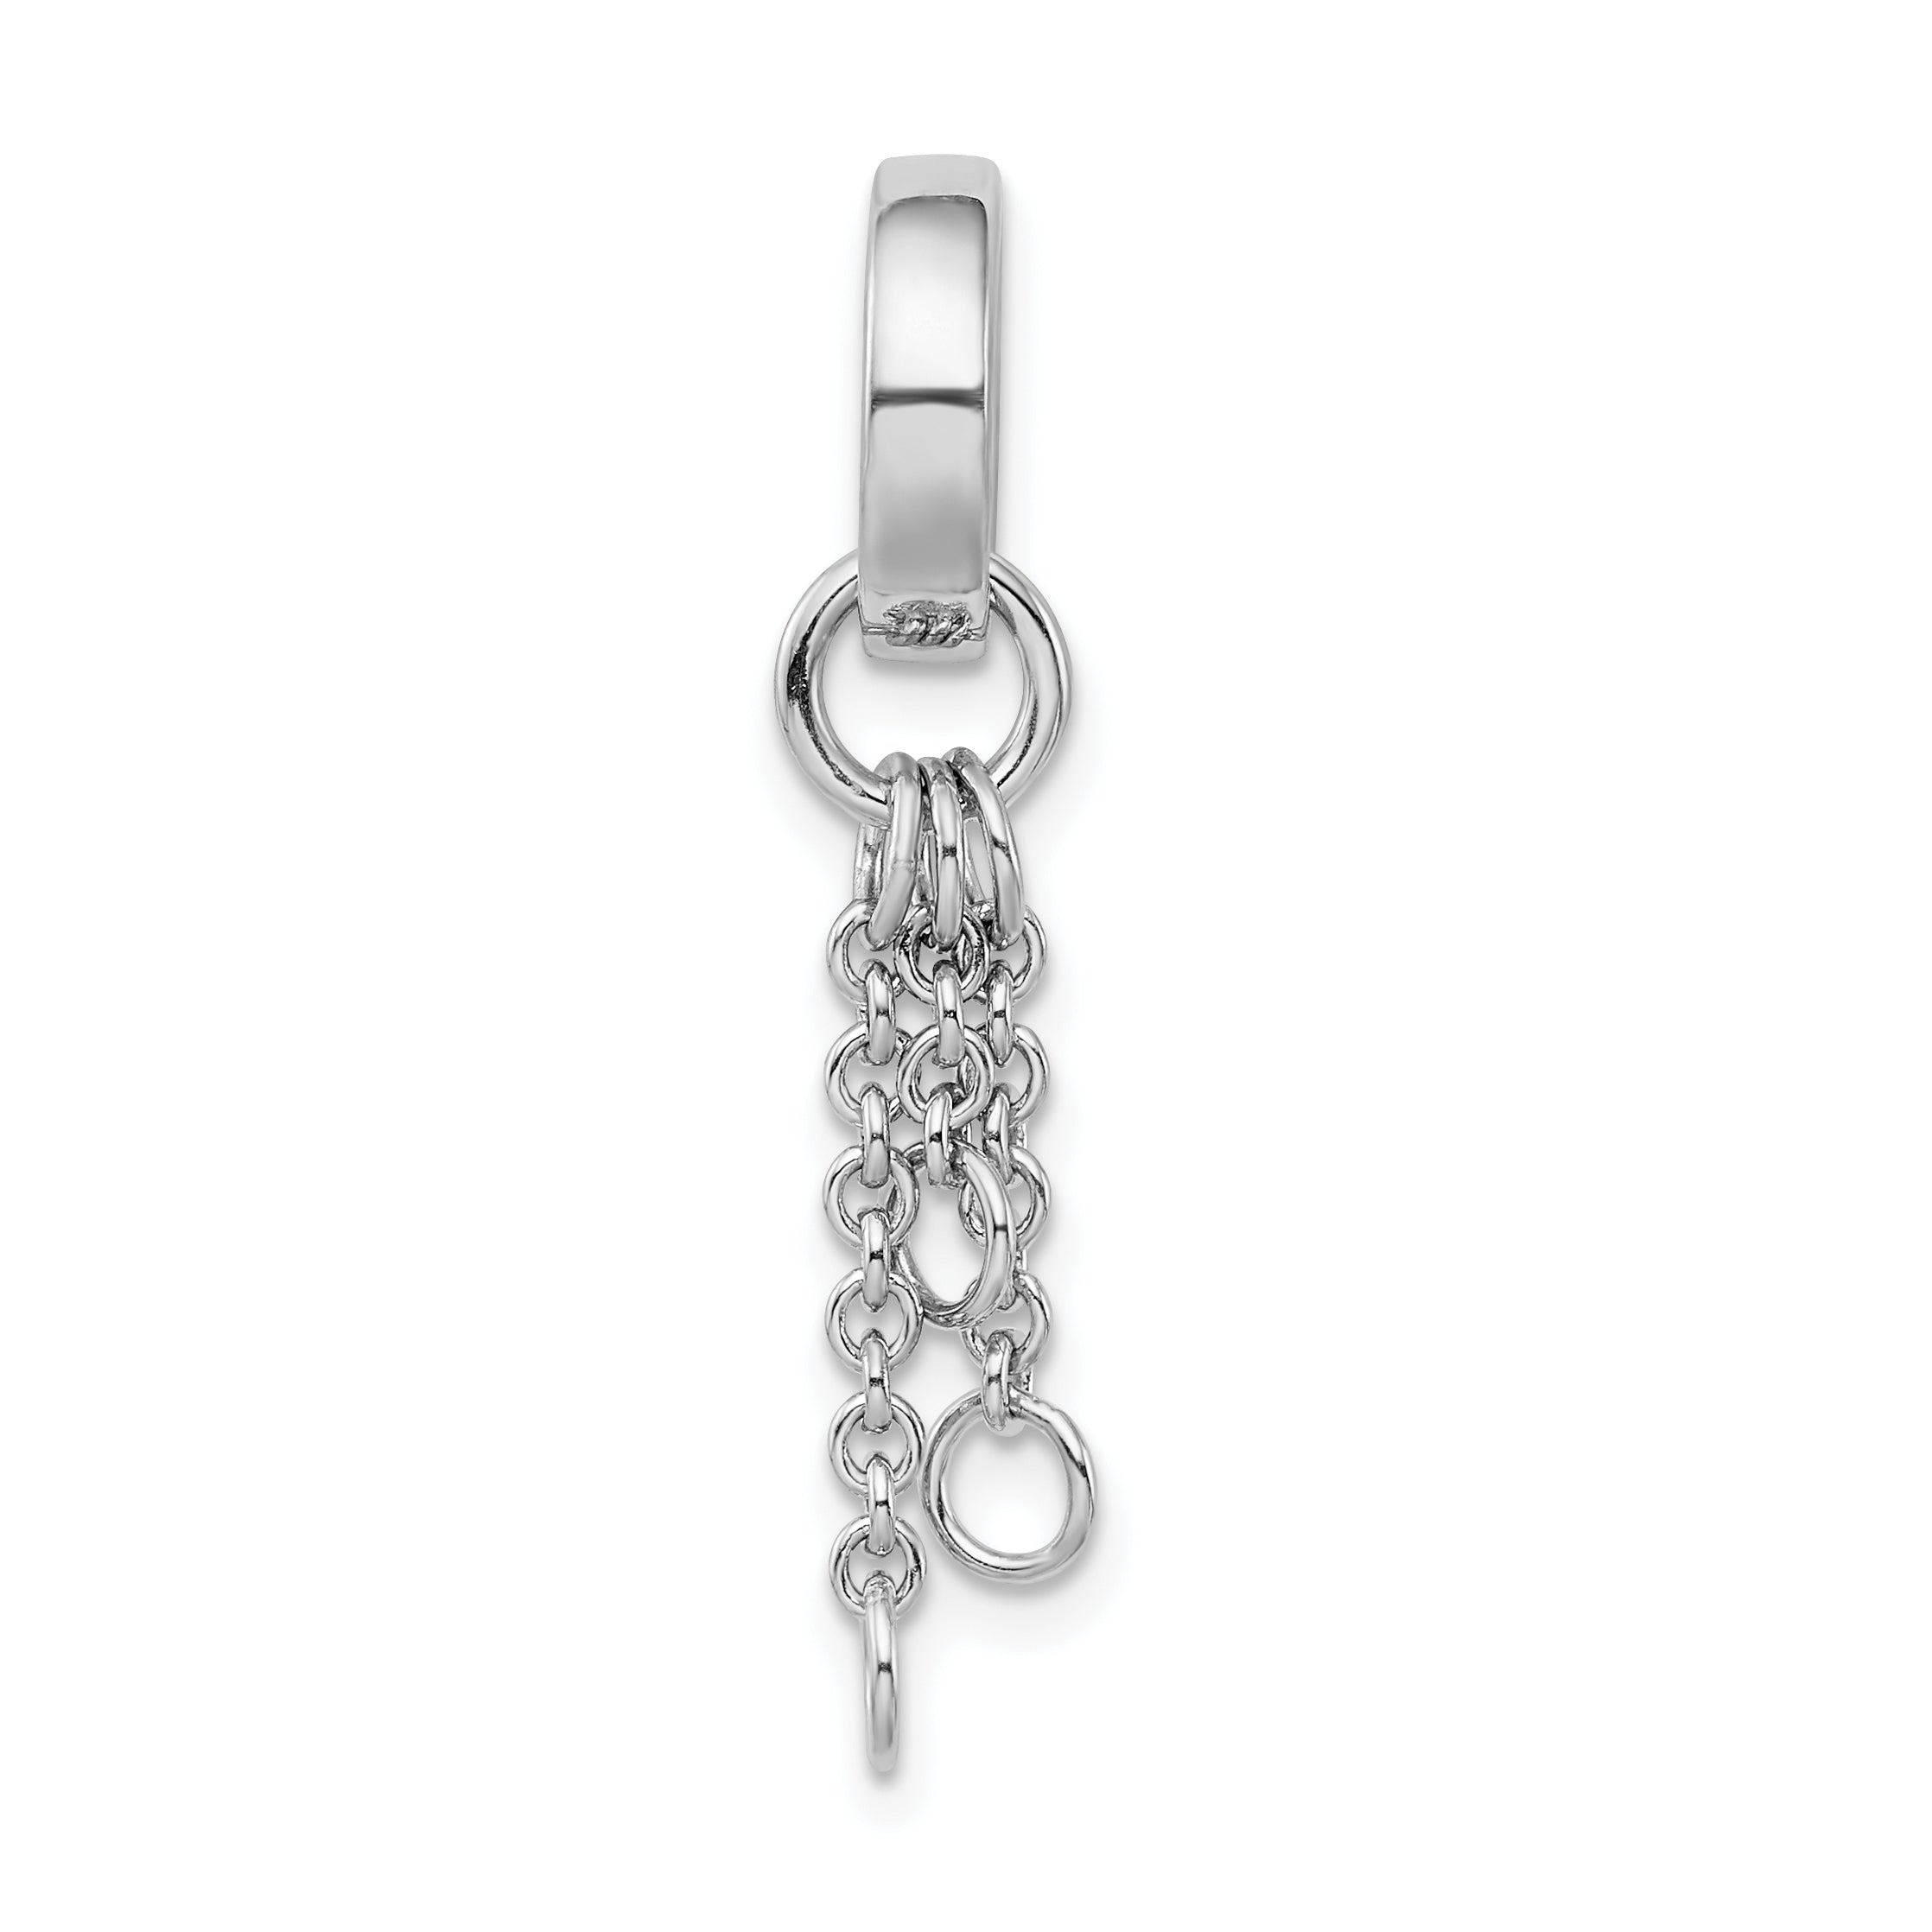 Amore La Vita Sterling Silver Rhodium-plated Polished Circle with Cable Chain Dangles Charm Carrier Pendant